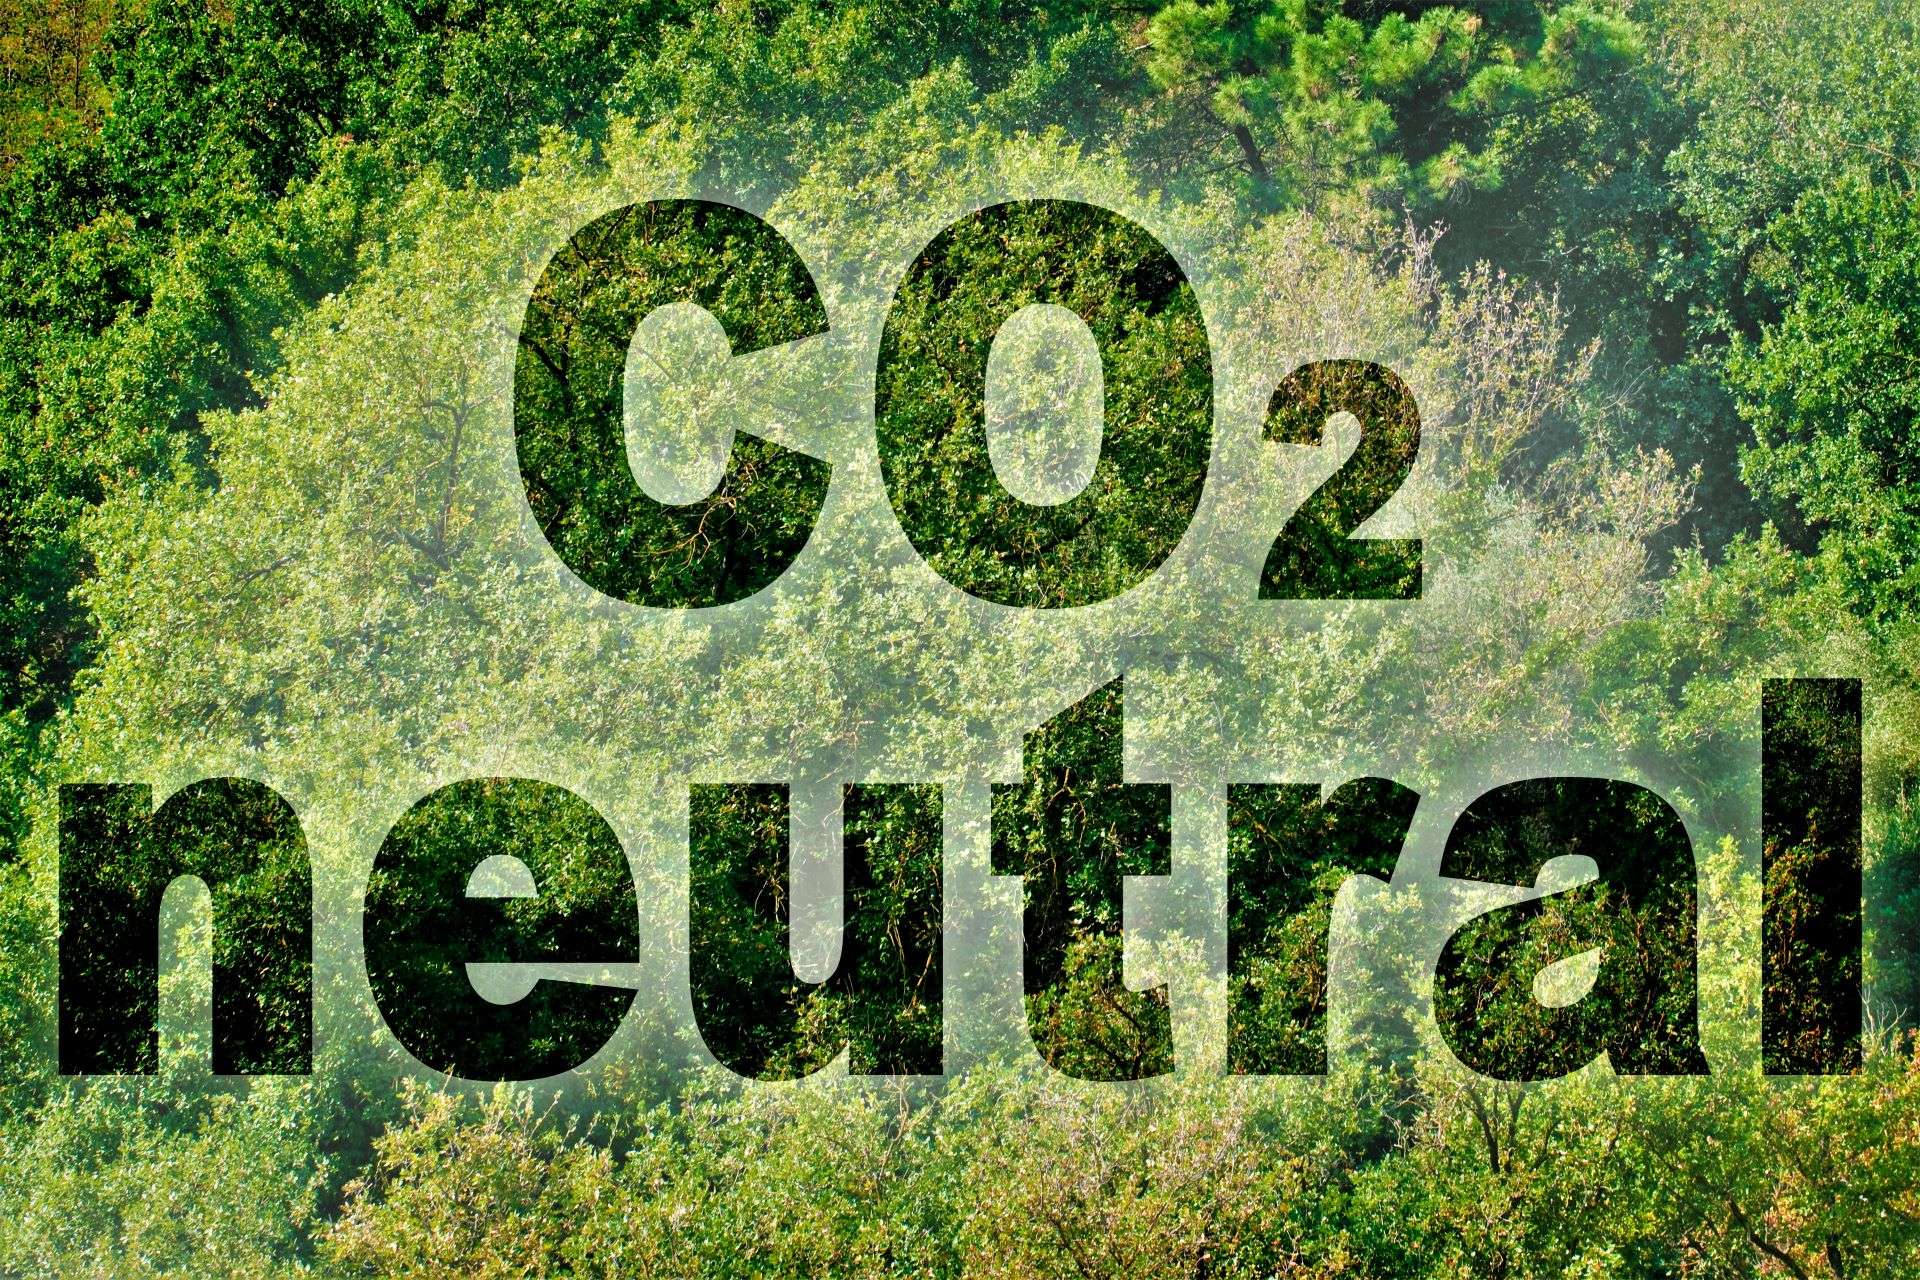 Being carbon neutral is one way to conserve our environment.